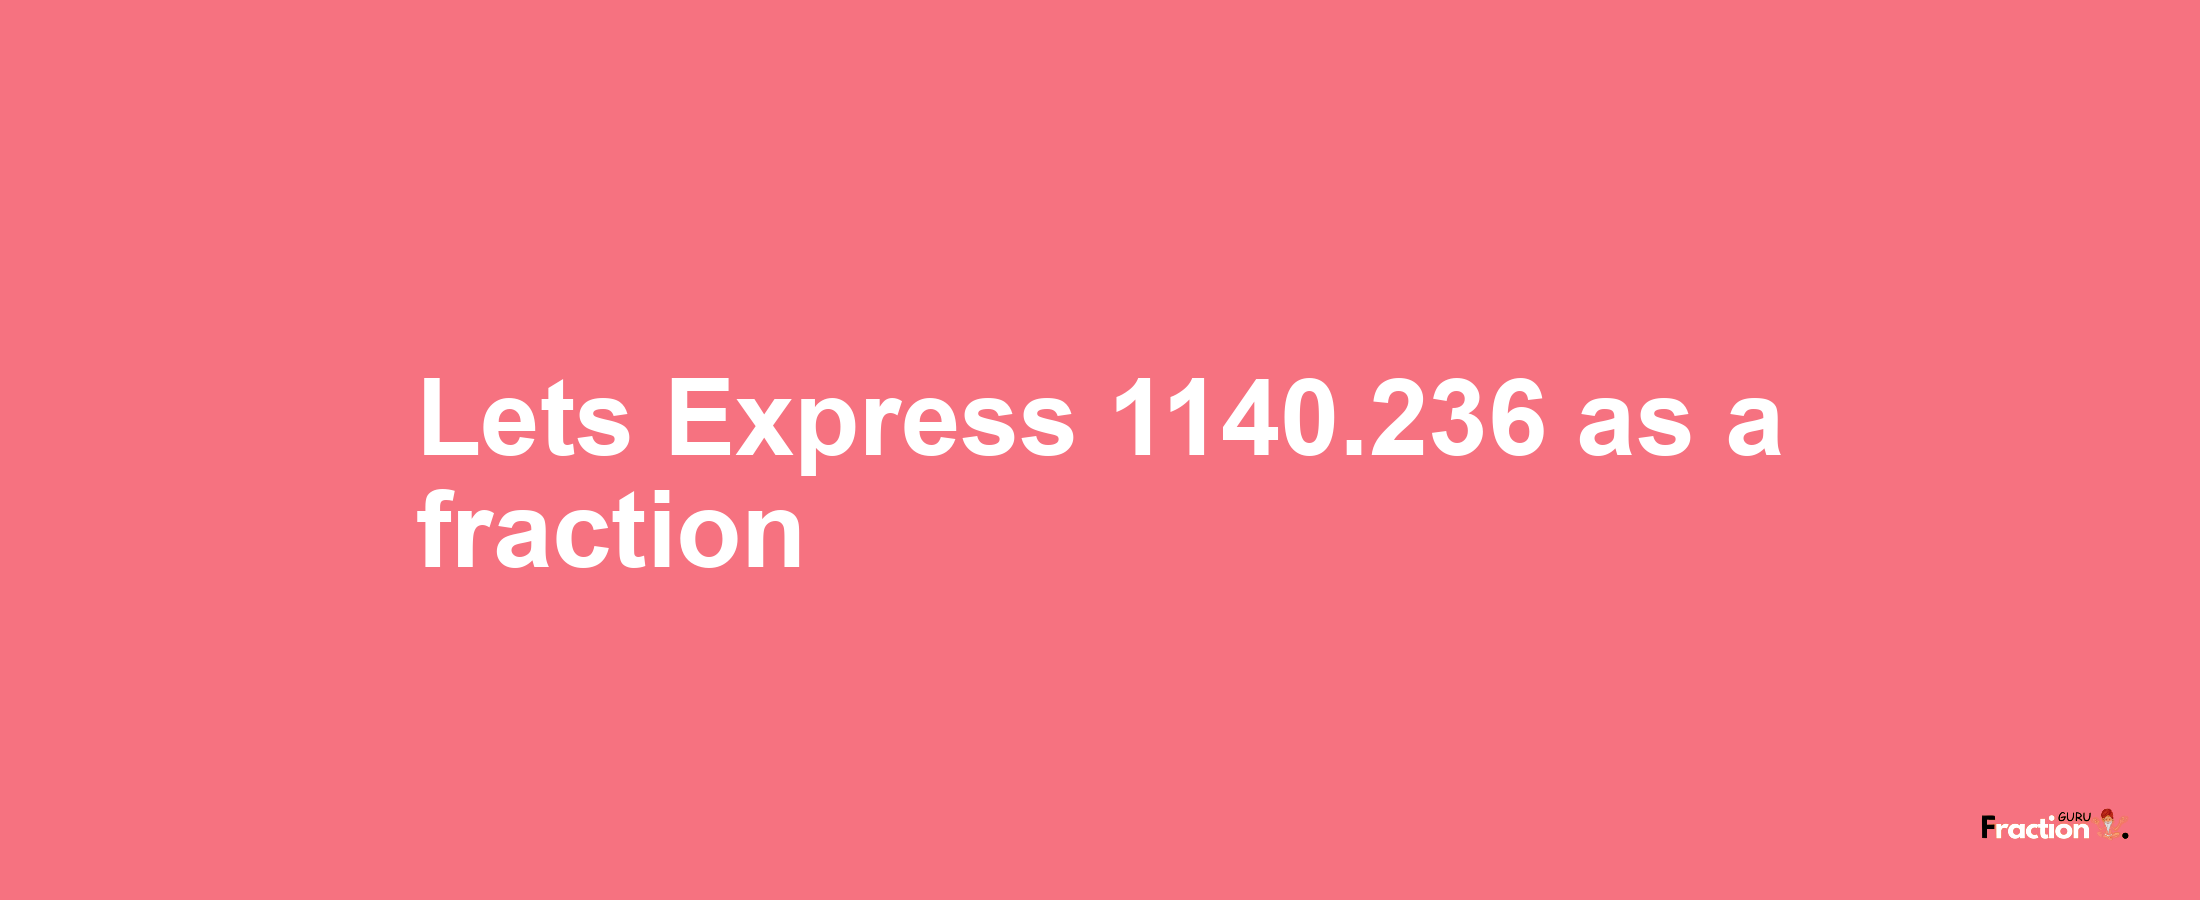 Lets Express 1140.236 as afraction